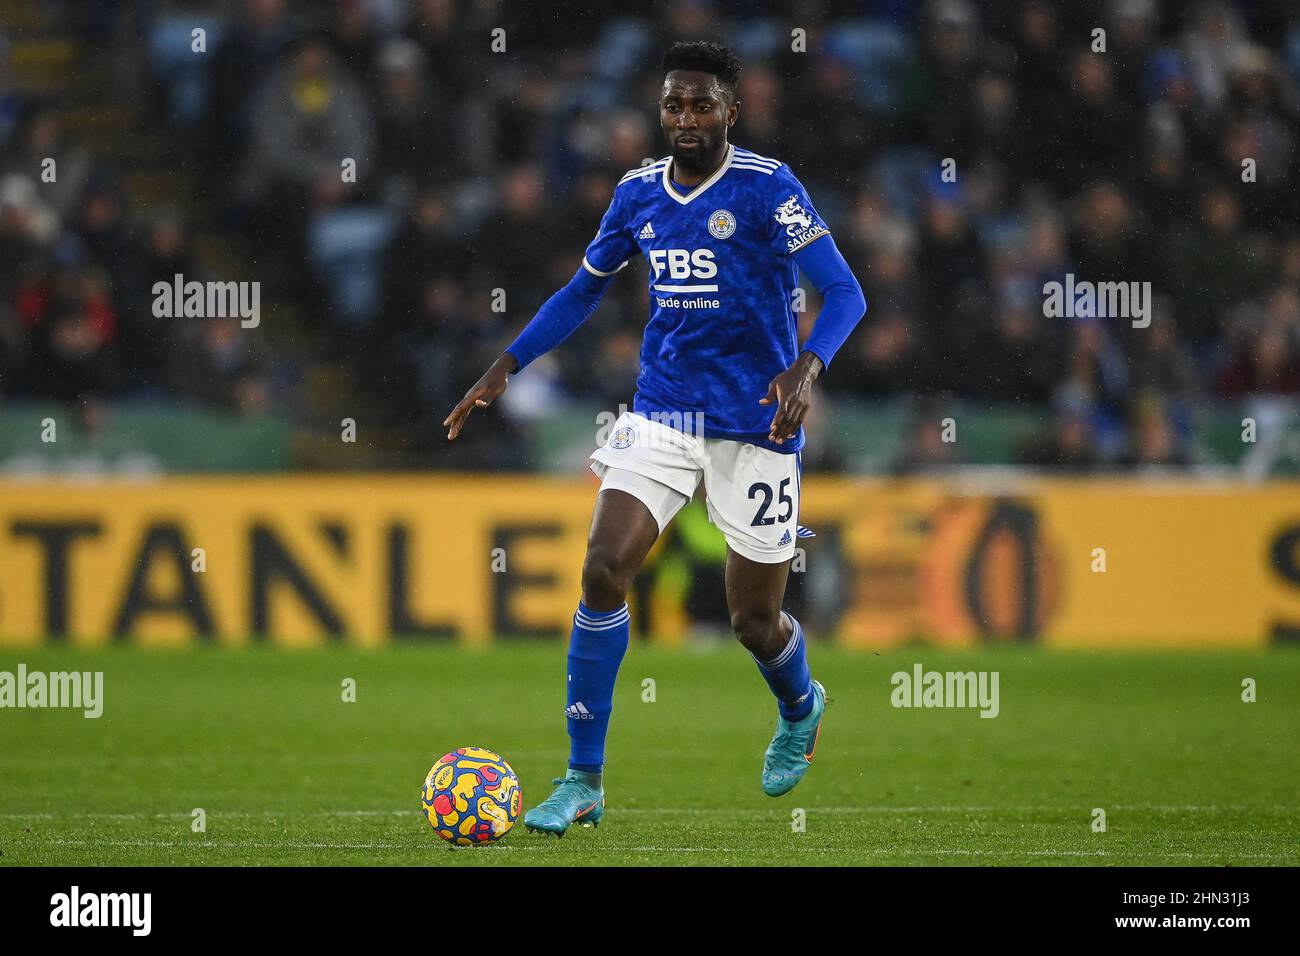 Wilfred Ndidi #25 of Leicester City makes a break with the ball in, on 2/13/2022. (Photo by Craig Thomas/News Images/Sipa USA) Credit: Sipa USA/Alamy Live News Stock Photo